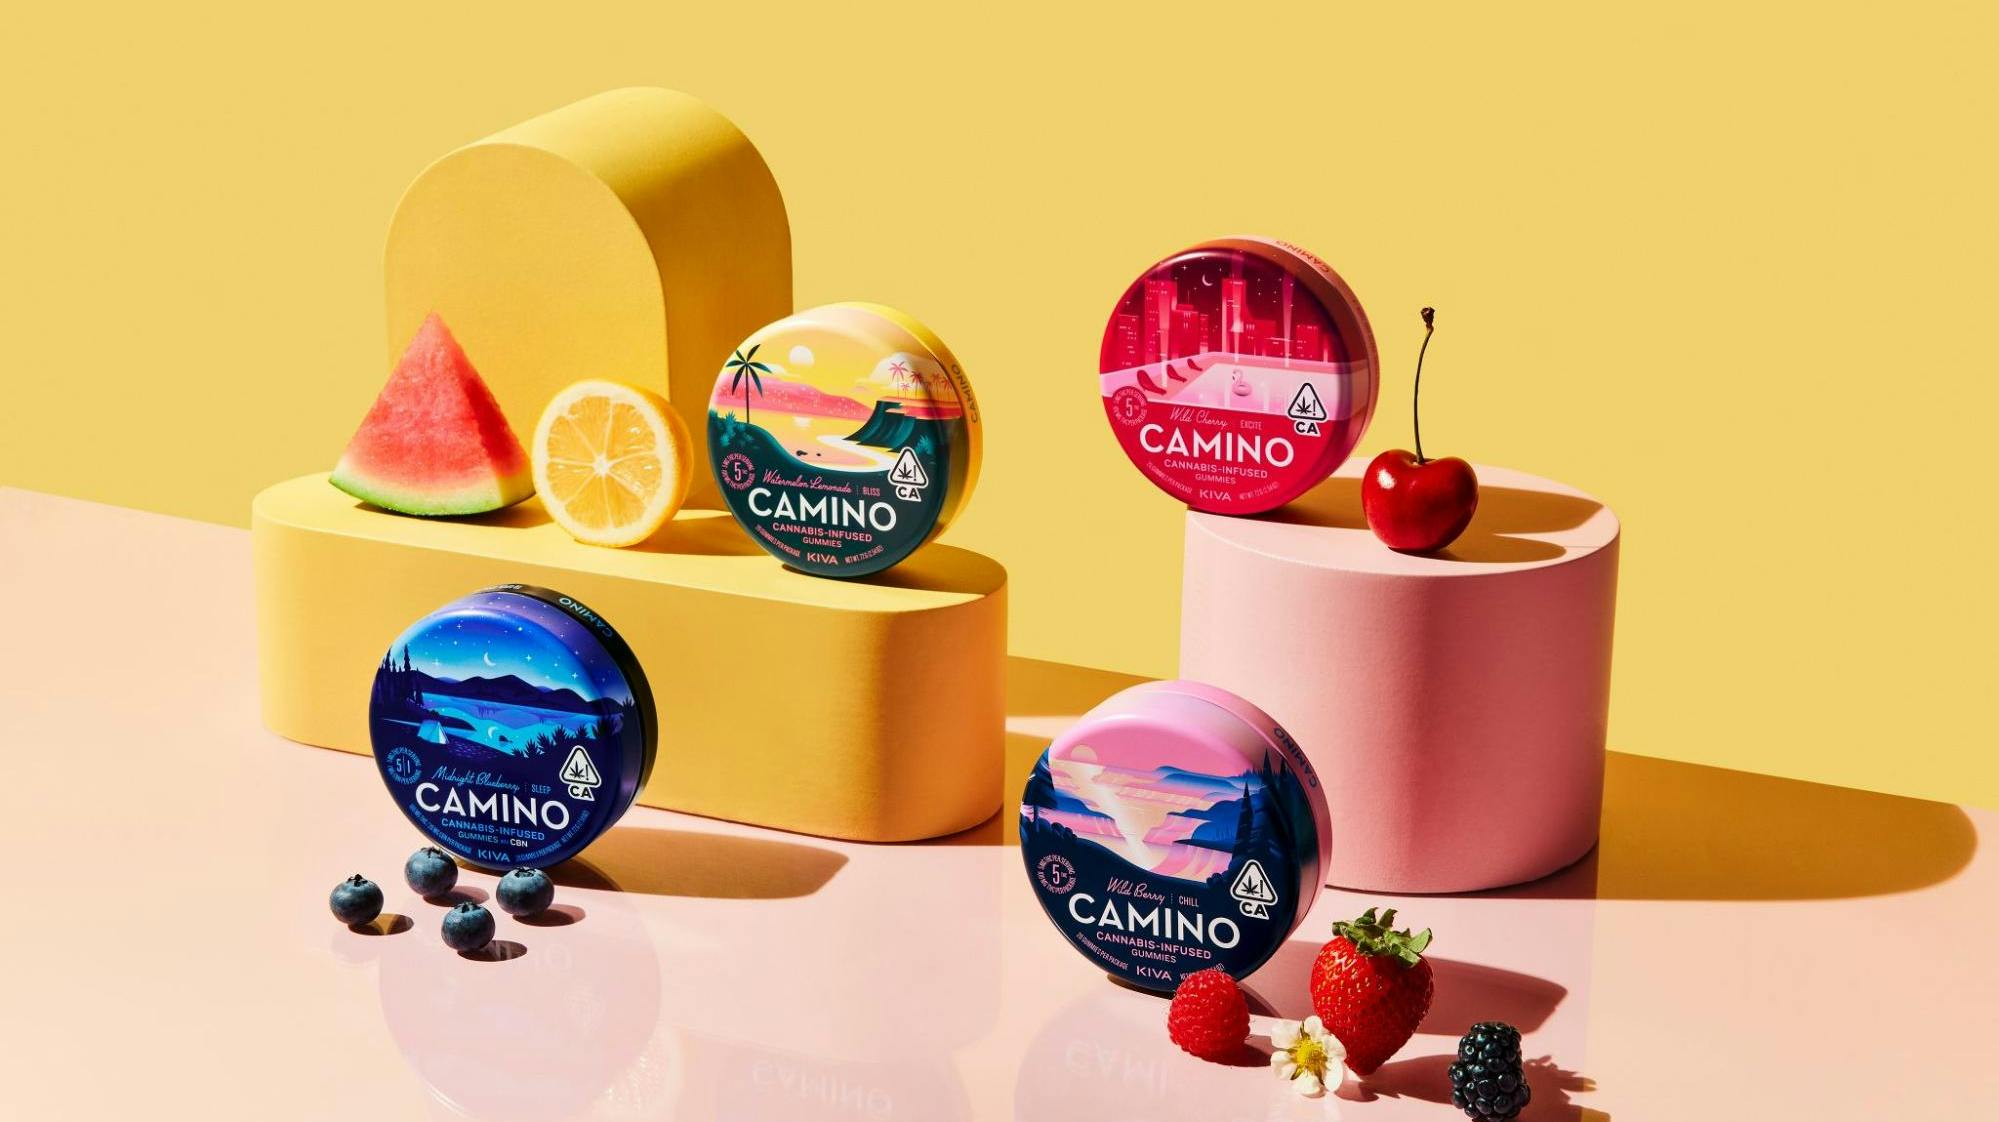 Kiva camino gummies packaged and arranged on top of 3D geometric shapes with fruits surrounding them 